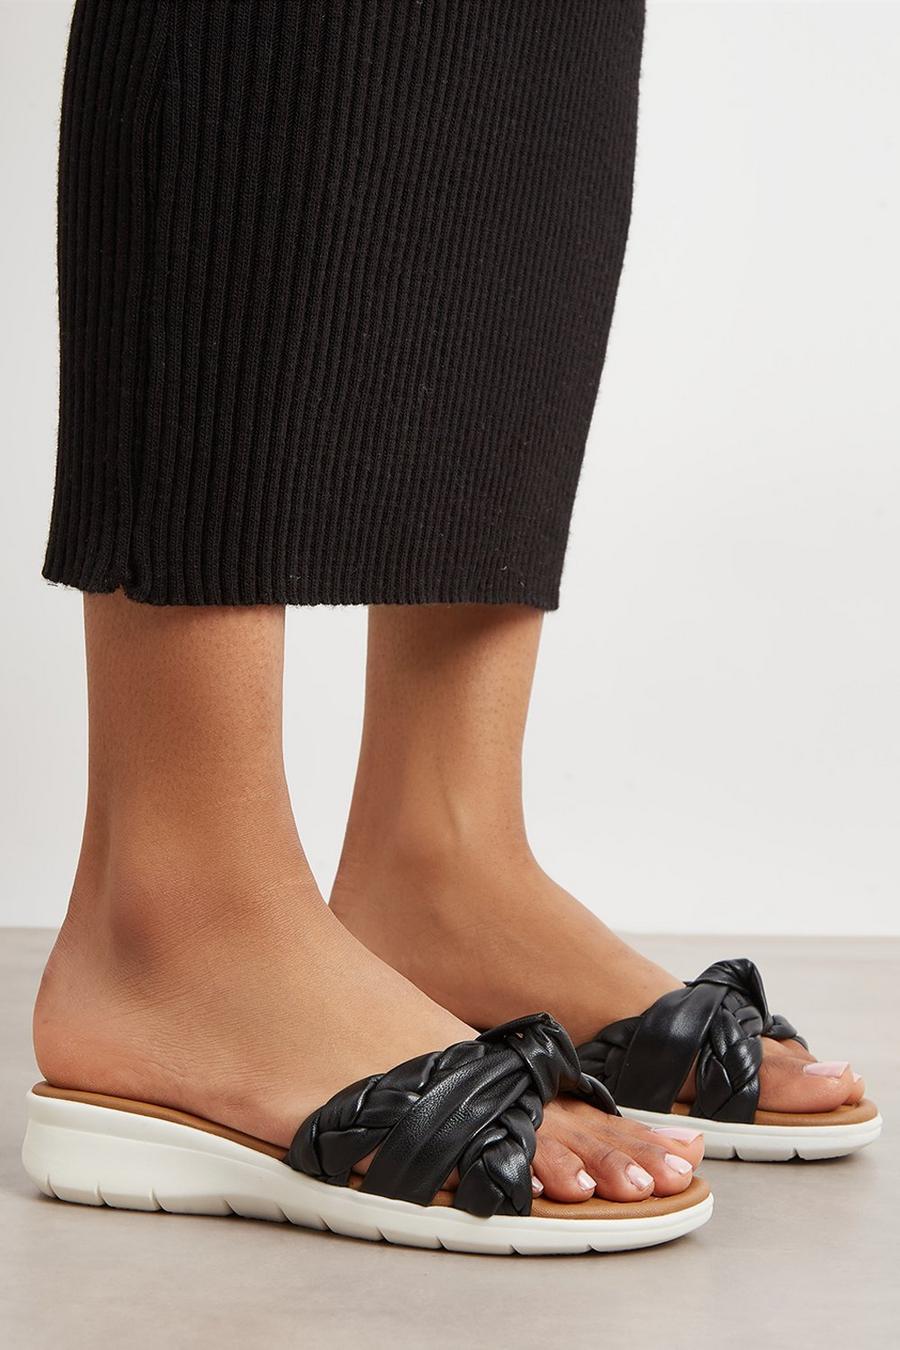 Good For The Sole: Skye Leather Wide Fit Flat Sandal